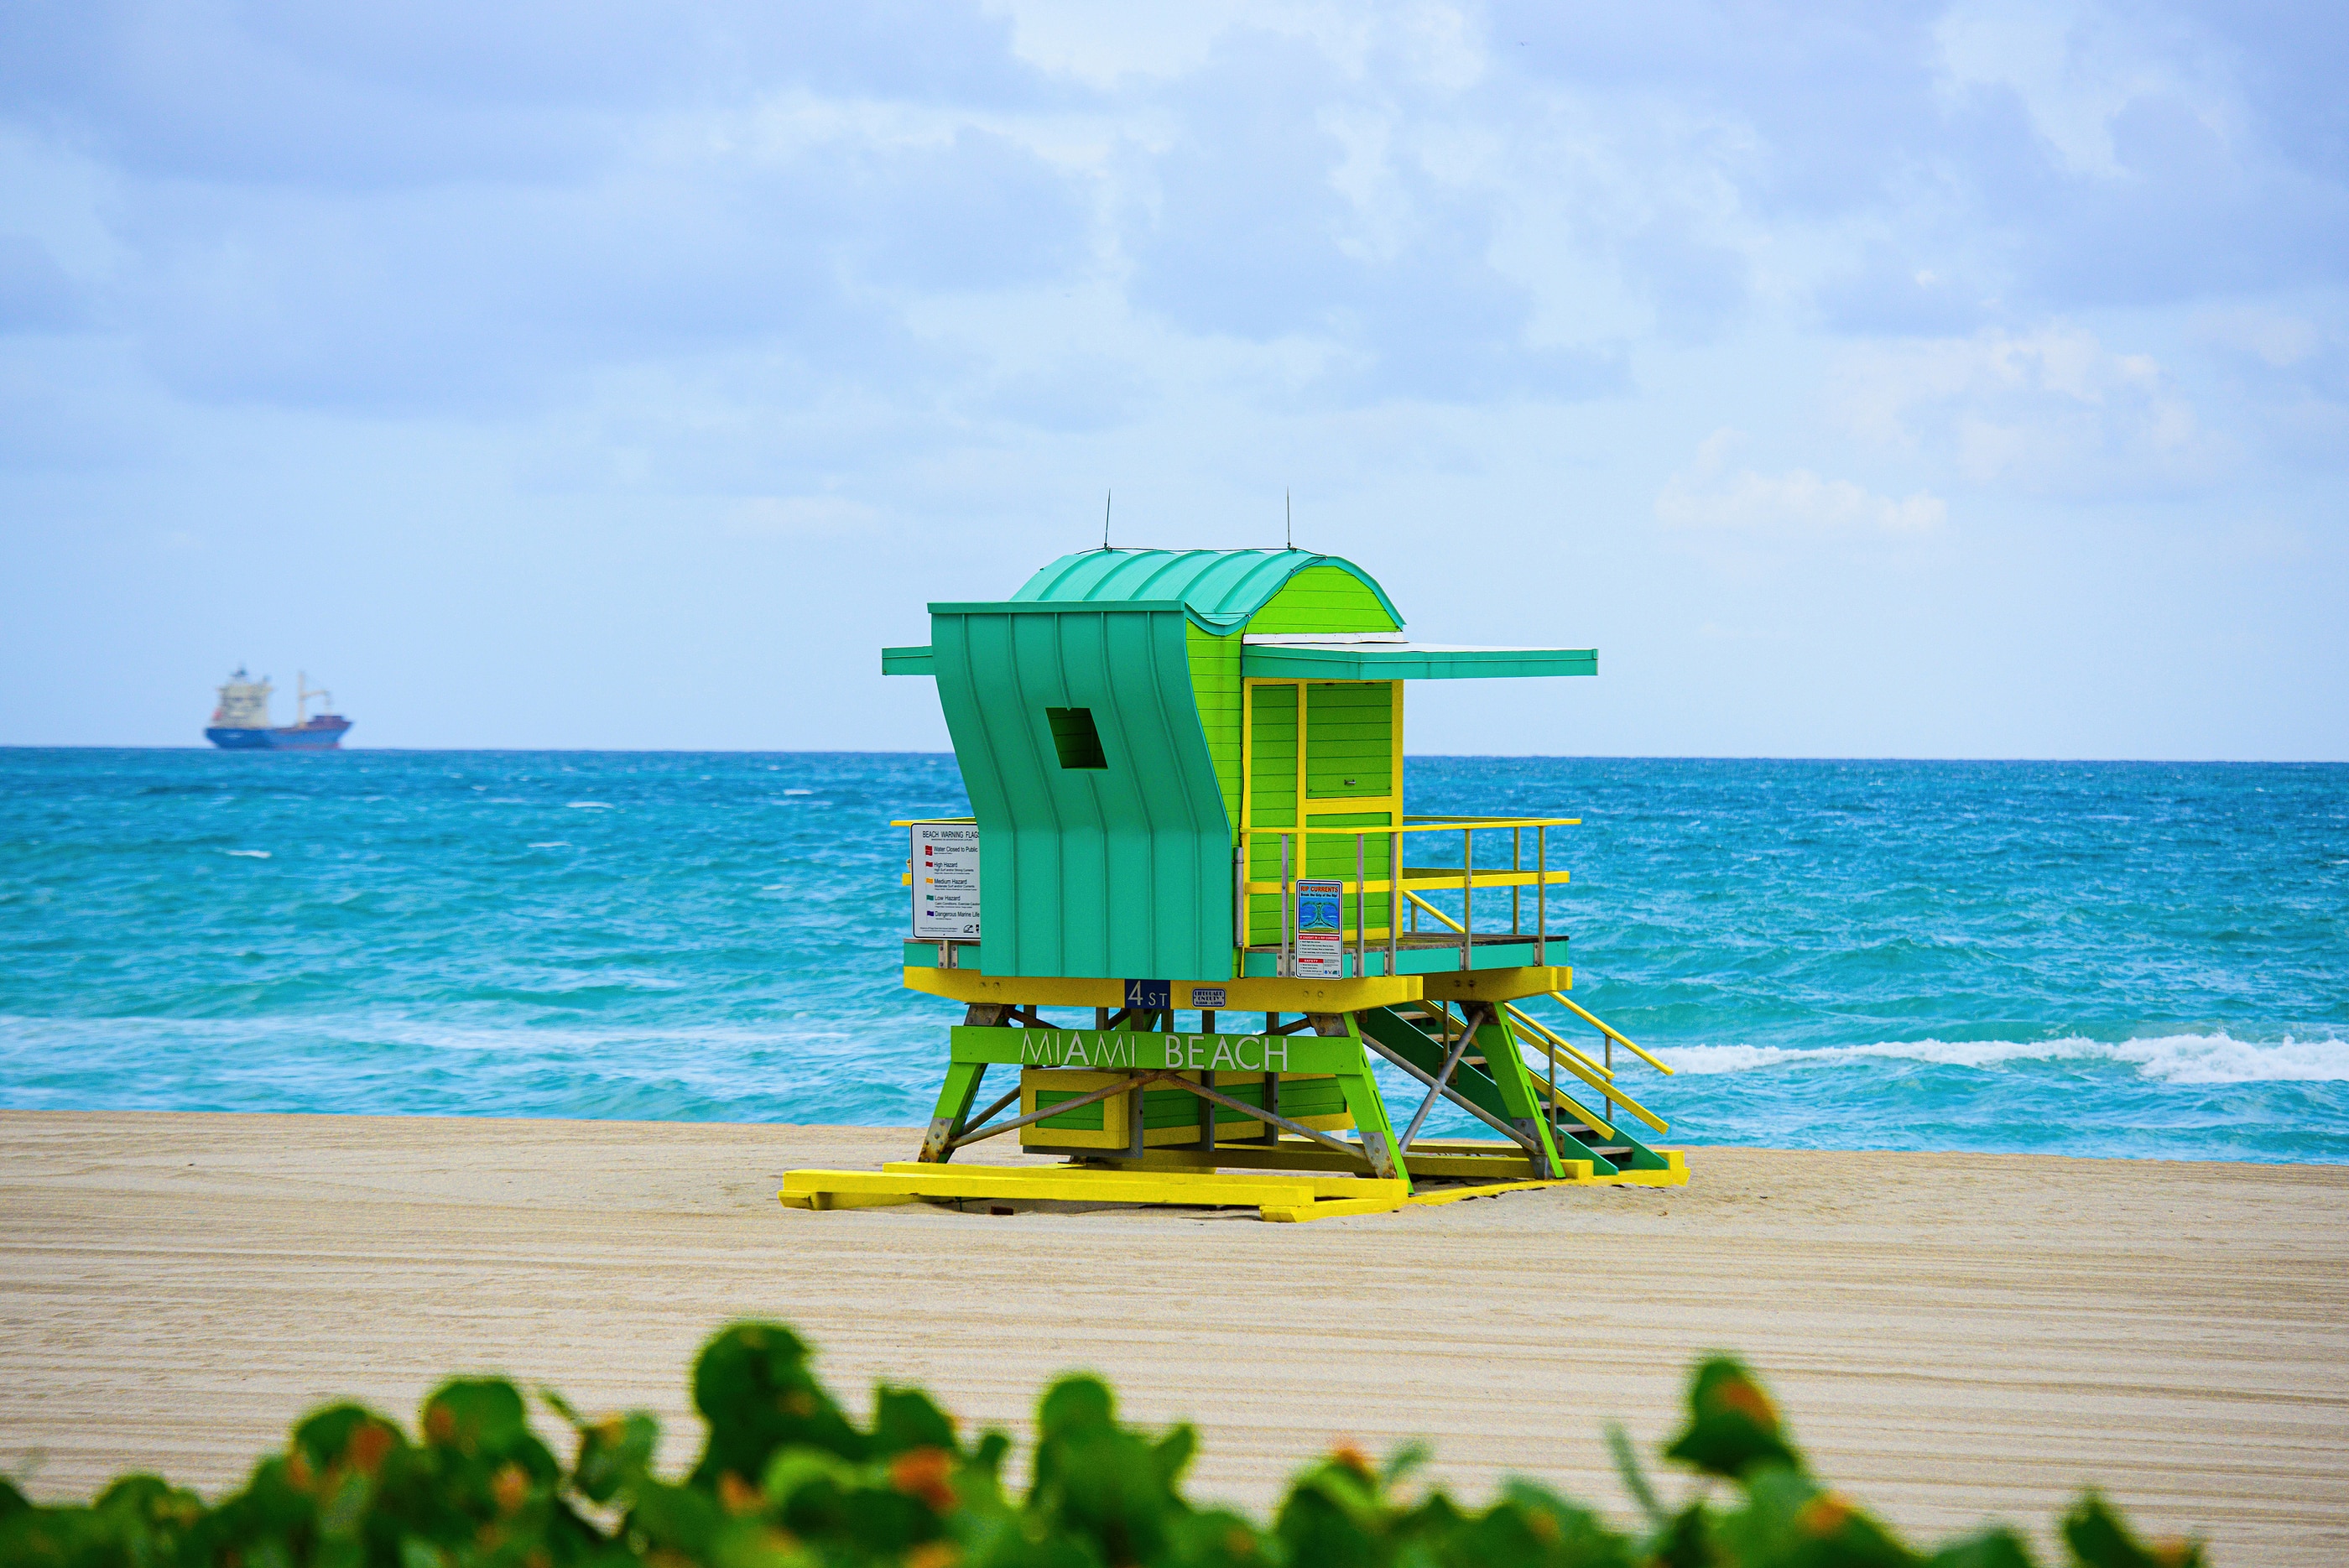 Miami South Beach Lifeguard Tower - Best Beaches for Digital Nomads